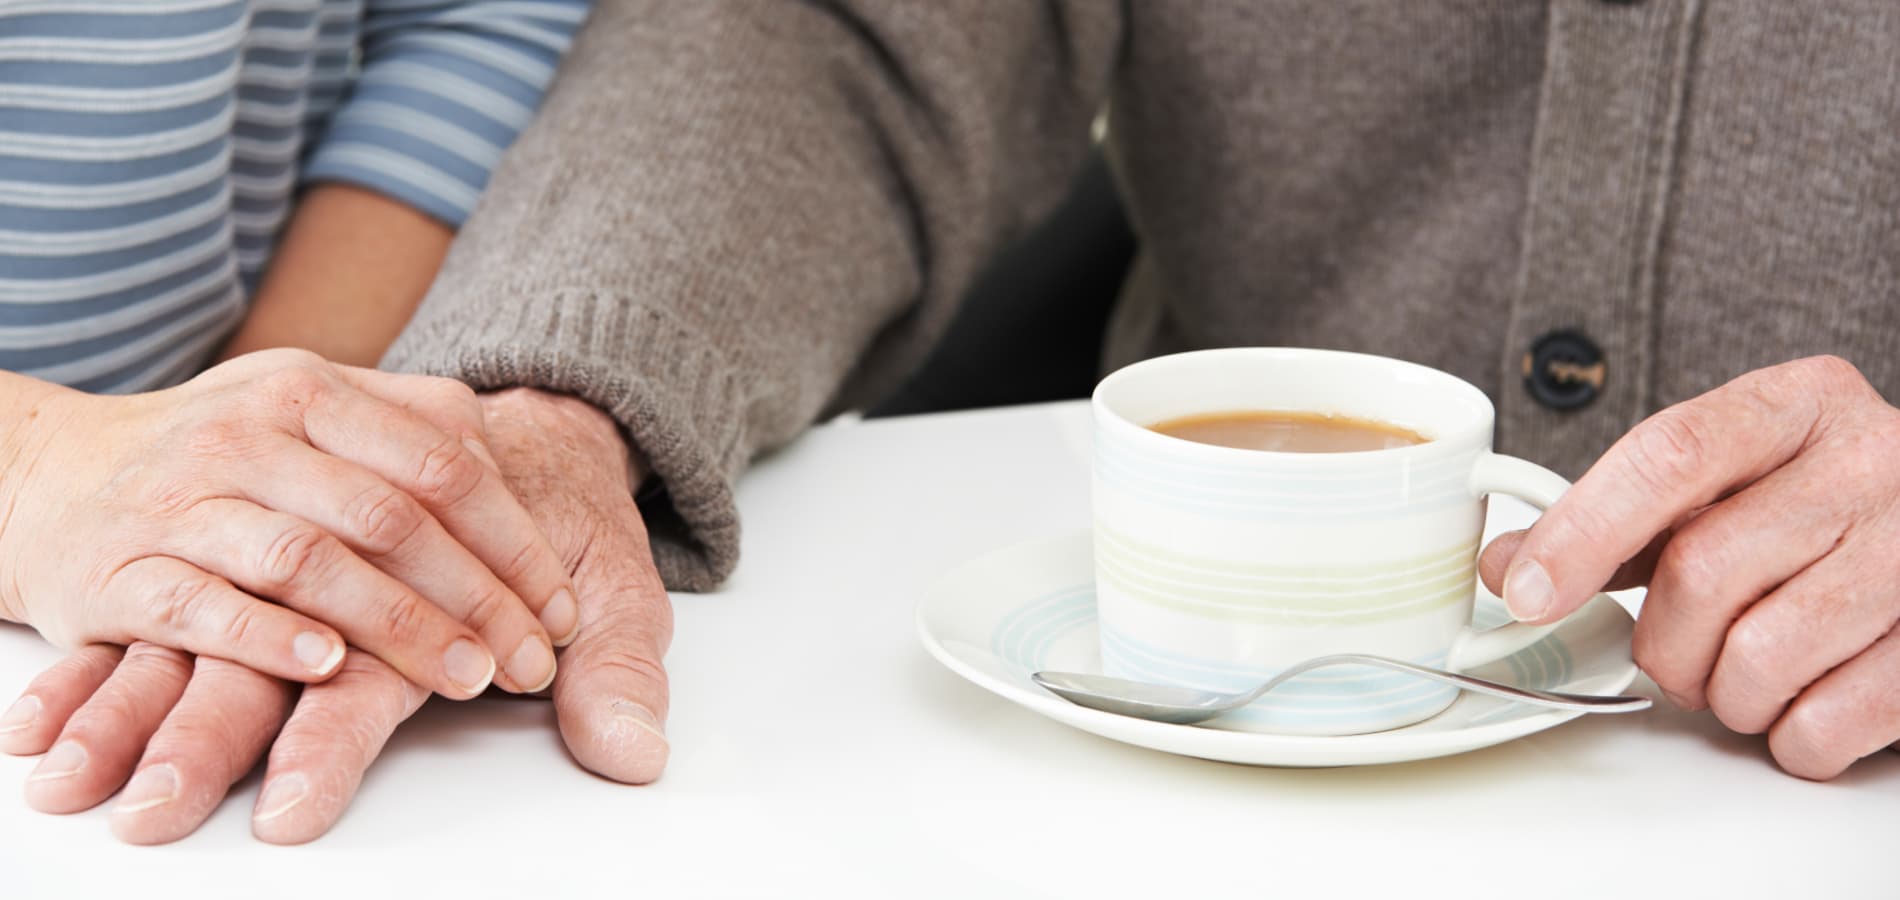 New study on grief in older people